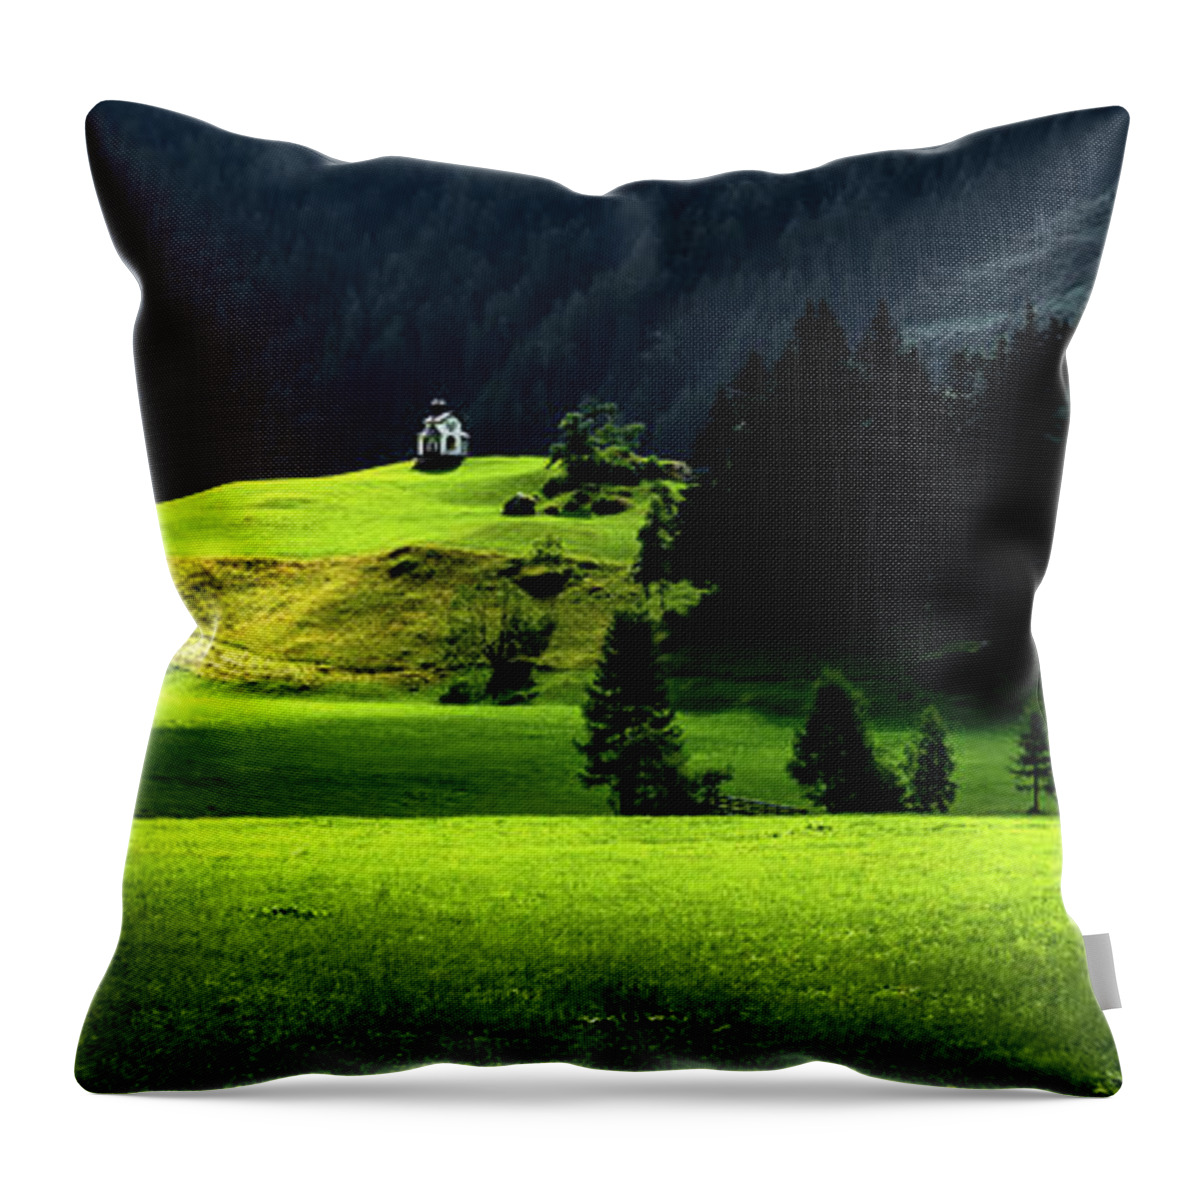 Abandoned Throw Pillow featuring the photograph Remote Chapel In Rural Landscape At Mountain Grossvenediger In Tirol In Austria by Andreas Berthold